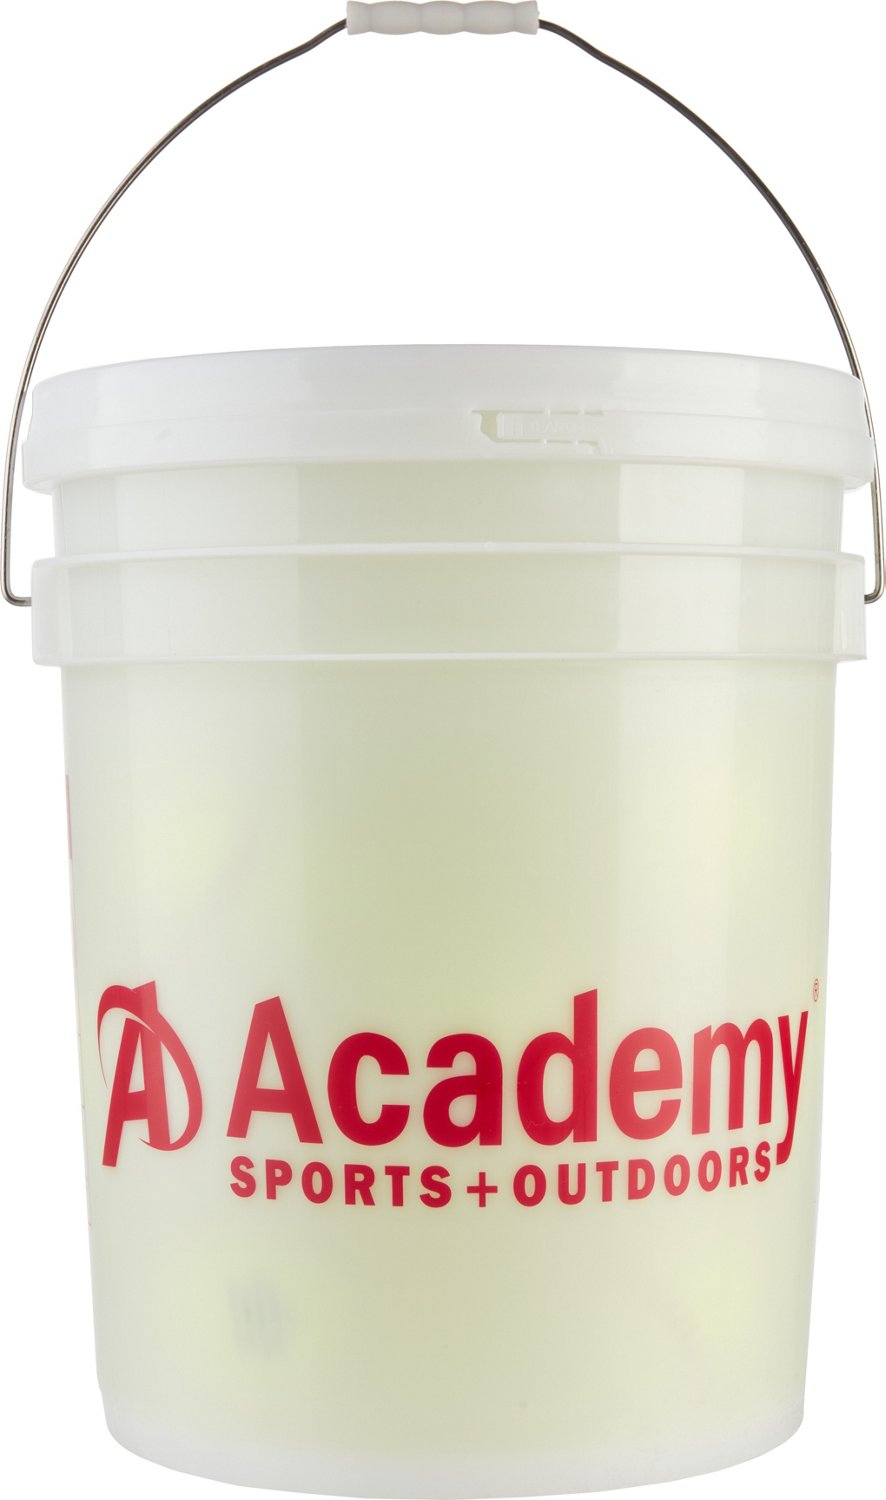 Academy Sports + Outdoors 11 in Fast-Pitch Practice Softballs 18-count Bucket                                                    - view number 1 selected